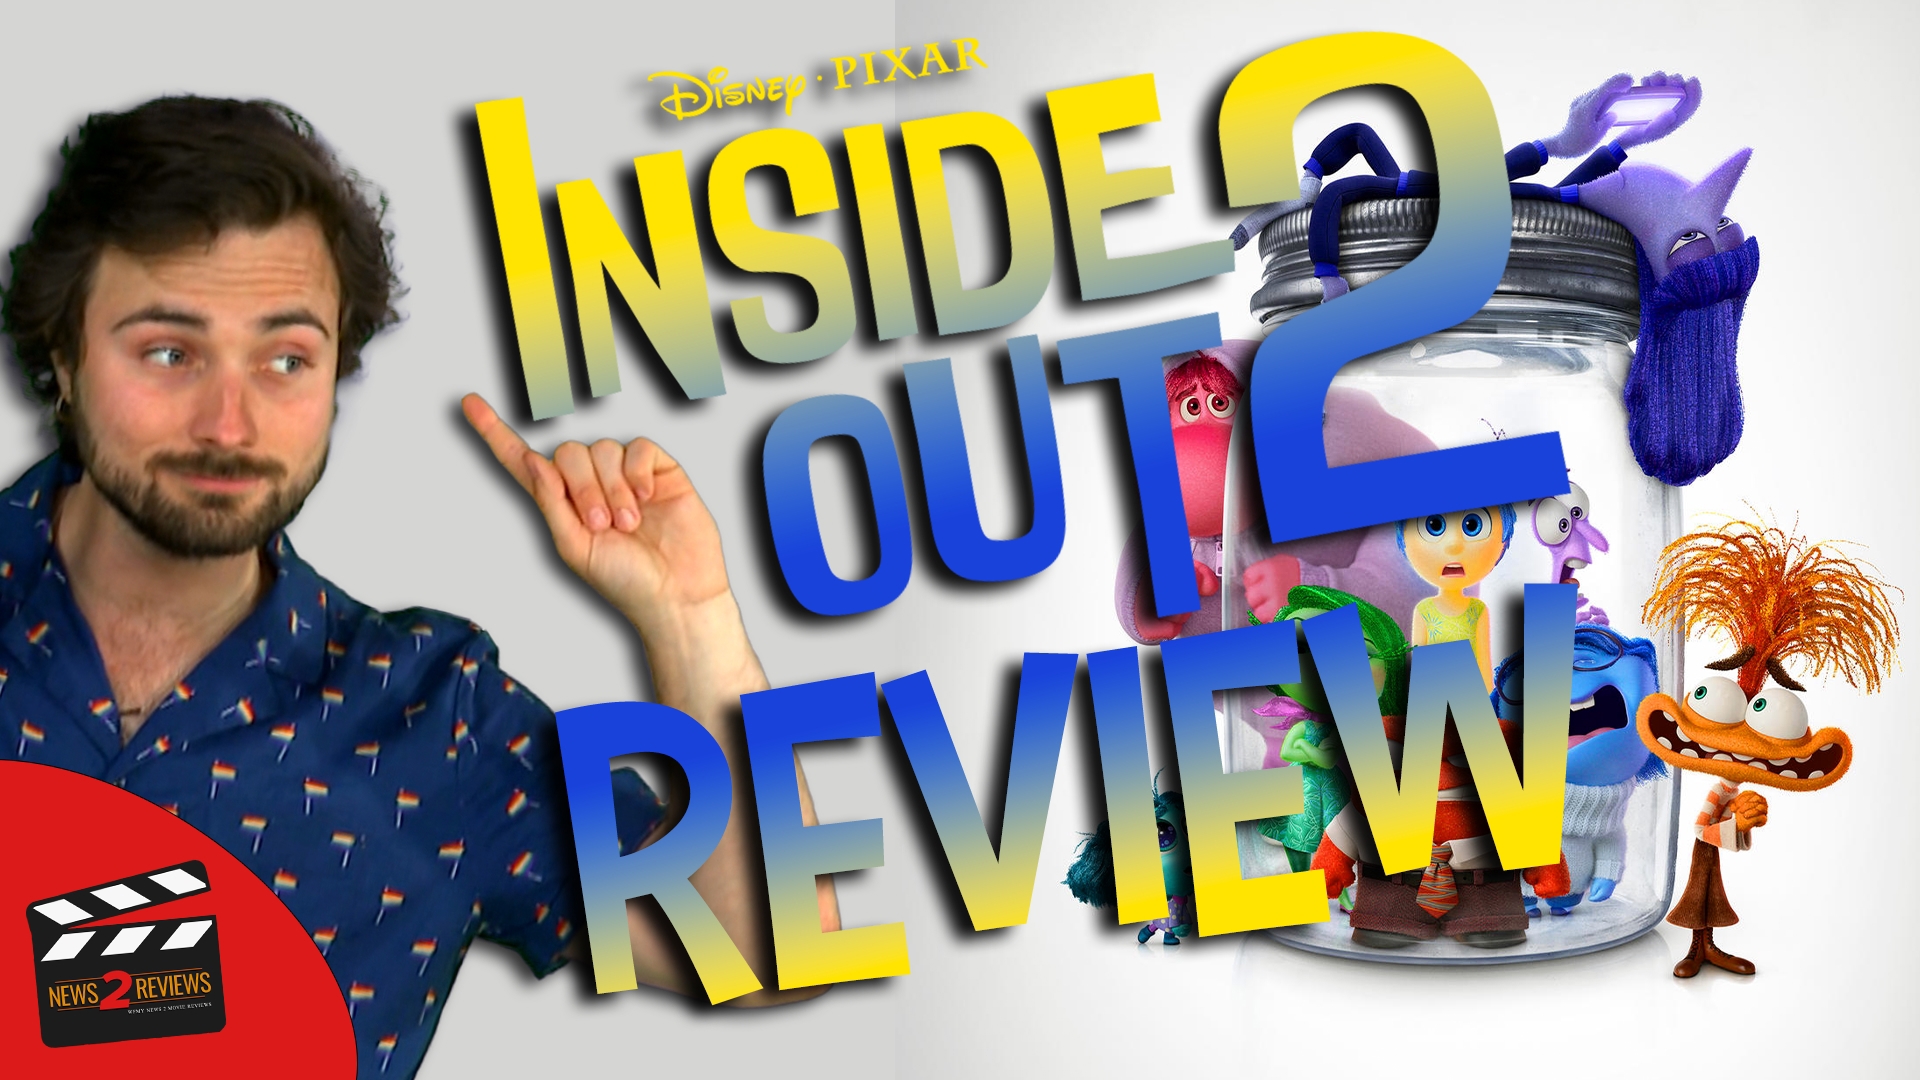 WFMY News 2’s Manning Franks shares his thoughts on Pixar's Inside Out 2